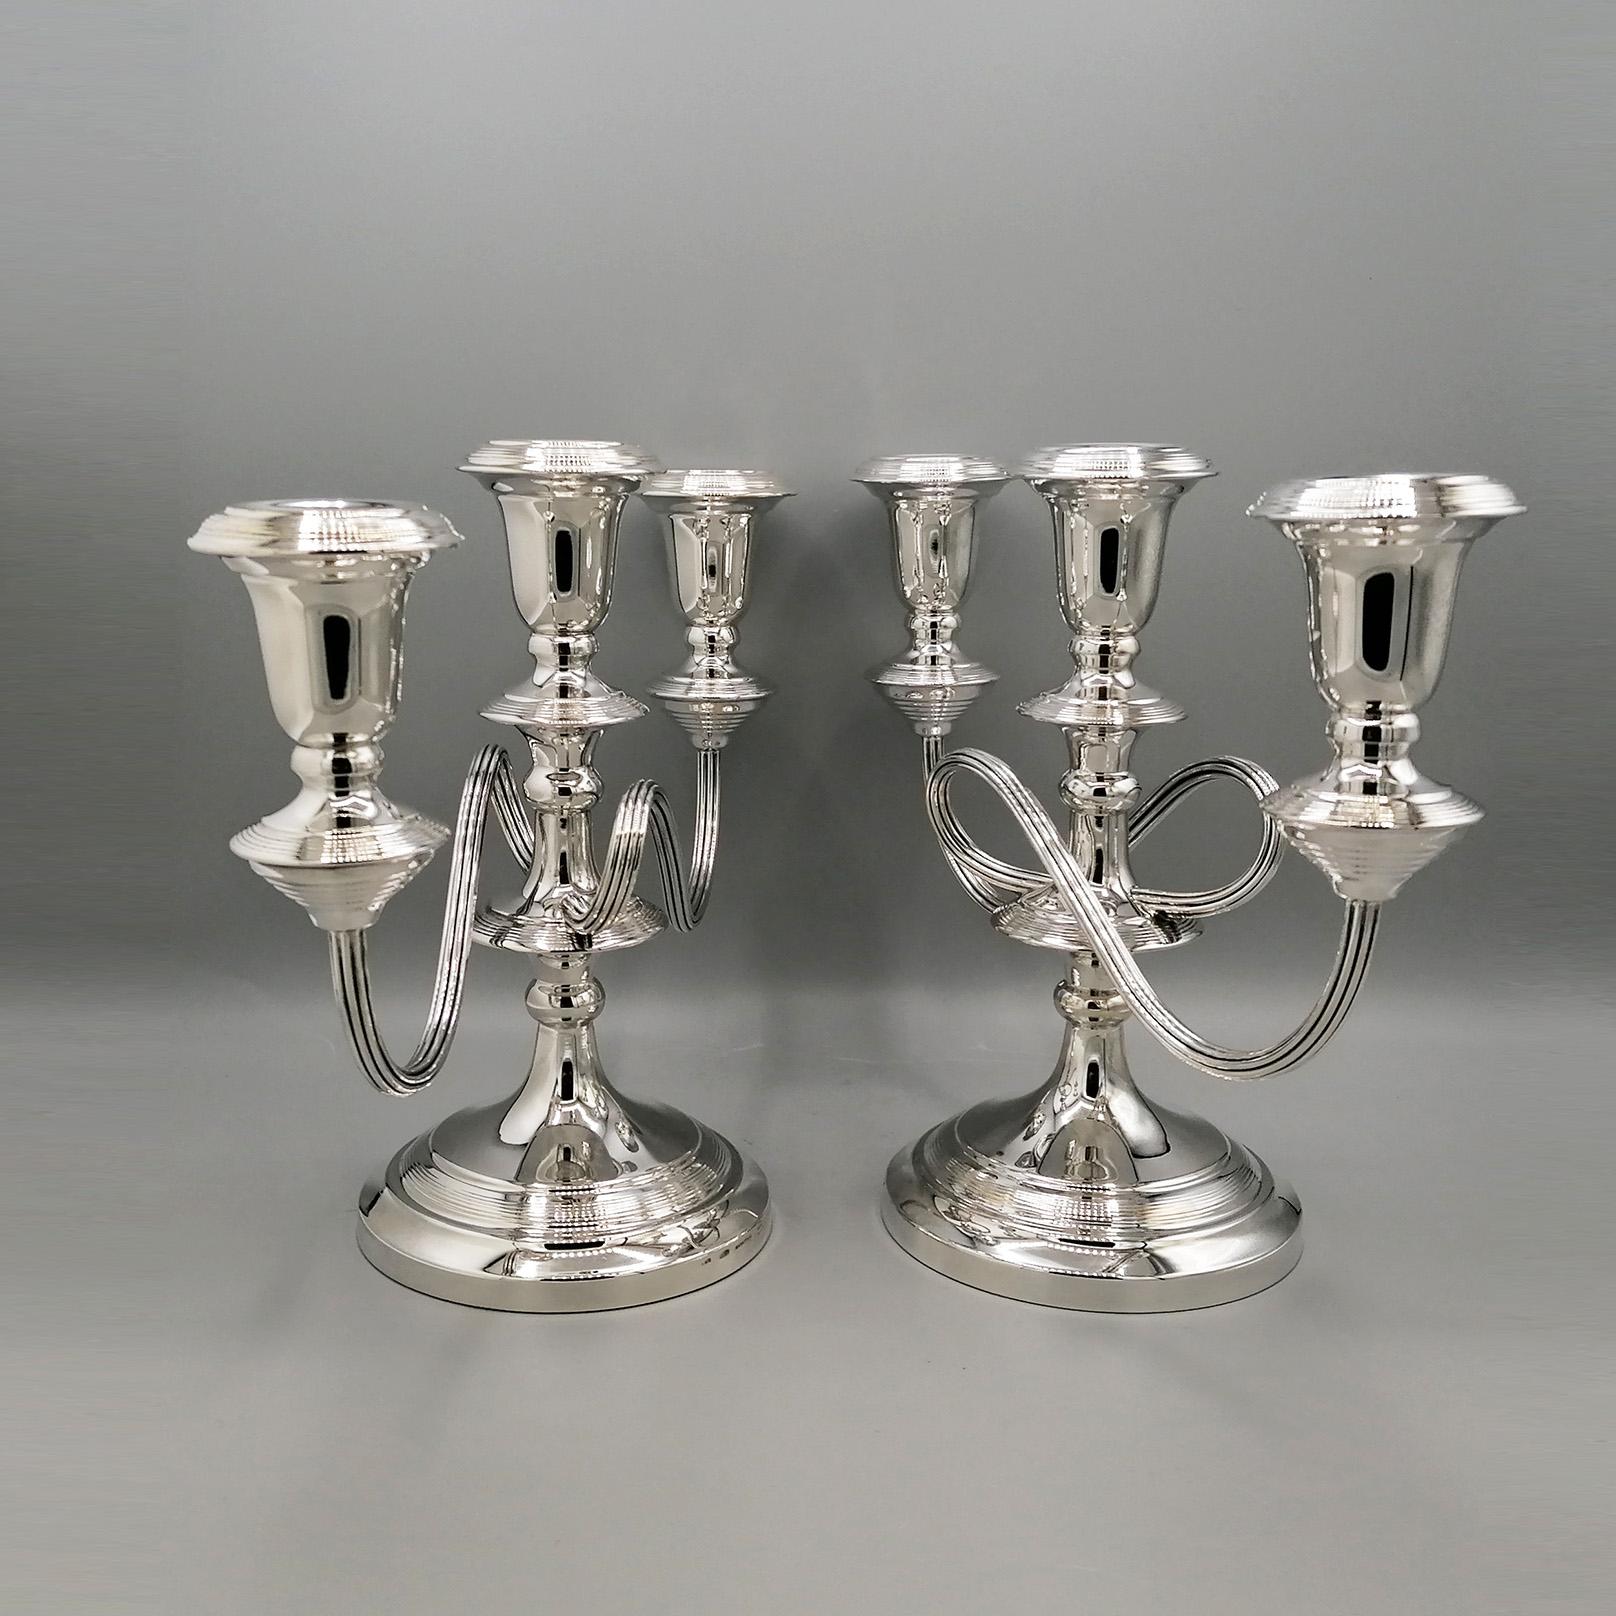 Pair of 3-light candelabra in 800/1000 solid silver.
The base is round decorated with a striped design, which is repeated twice on the stem, in the wax collectors and in the candle holder buds.
The support arms are sinuous with an S design, made